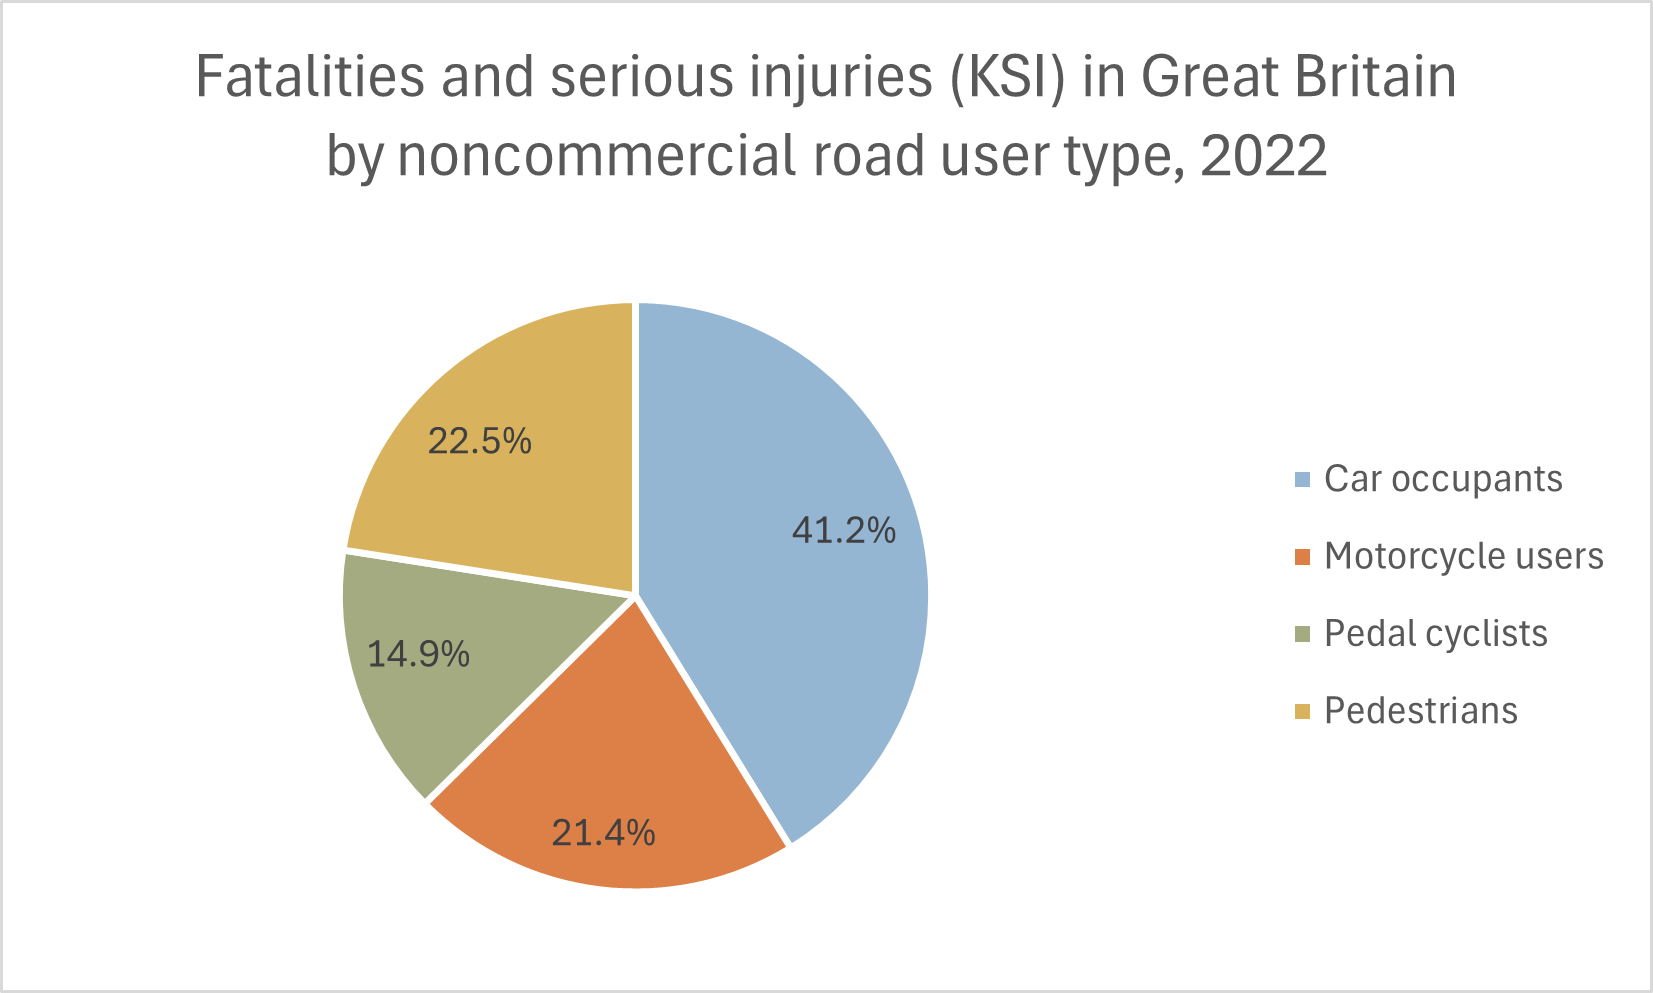 KSI numbers by noncom user type